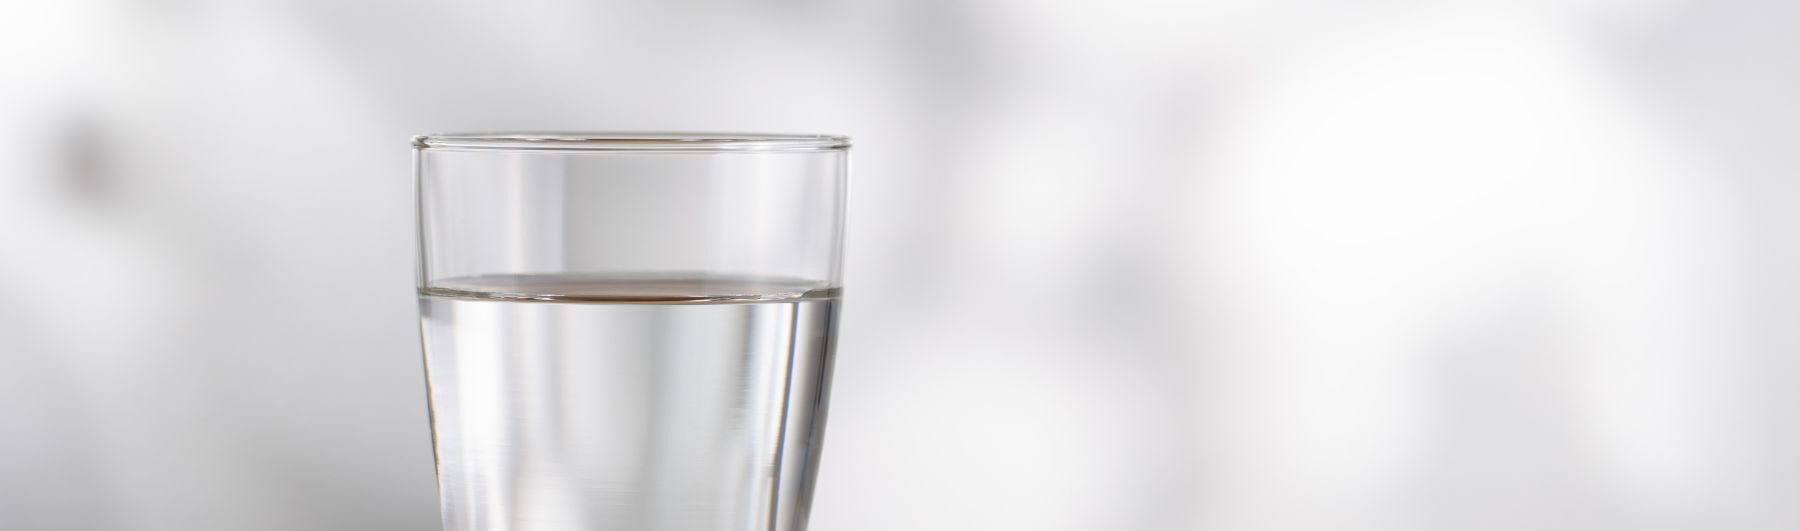 closeup of a cup of water on a blank blurred background